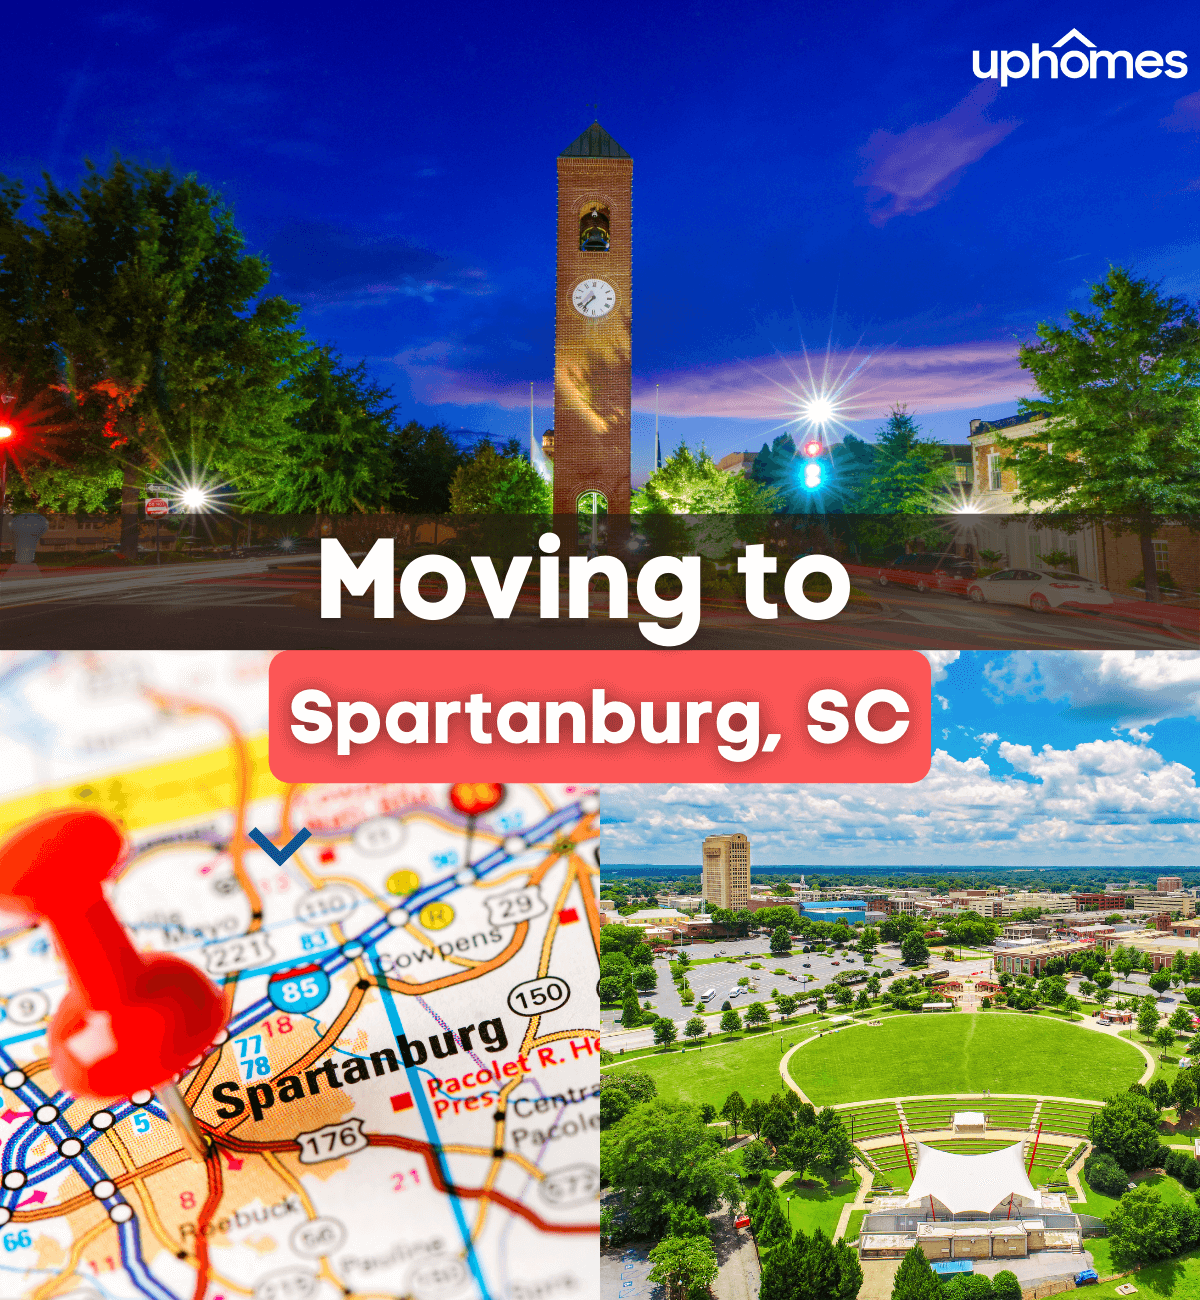 Moving to Spartanburg SC - What is it like Living in Spartanburg?